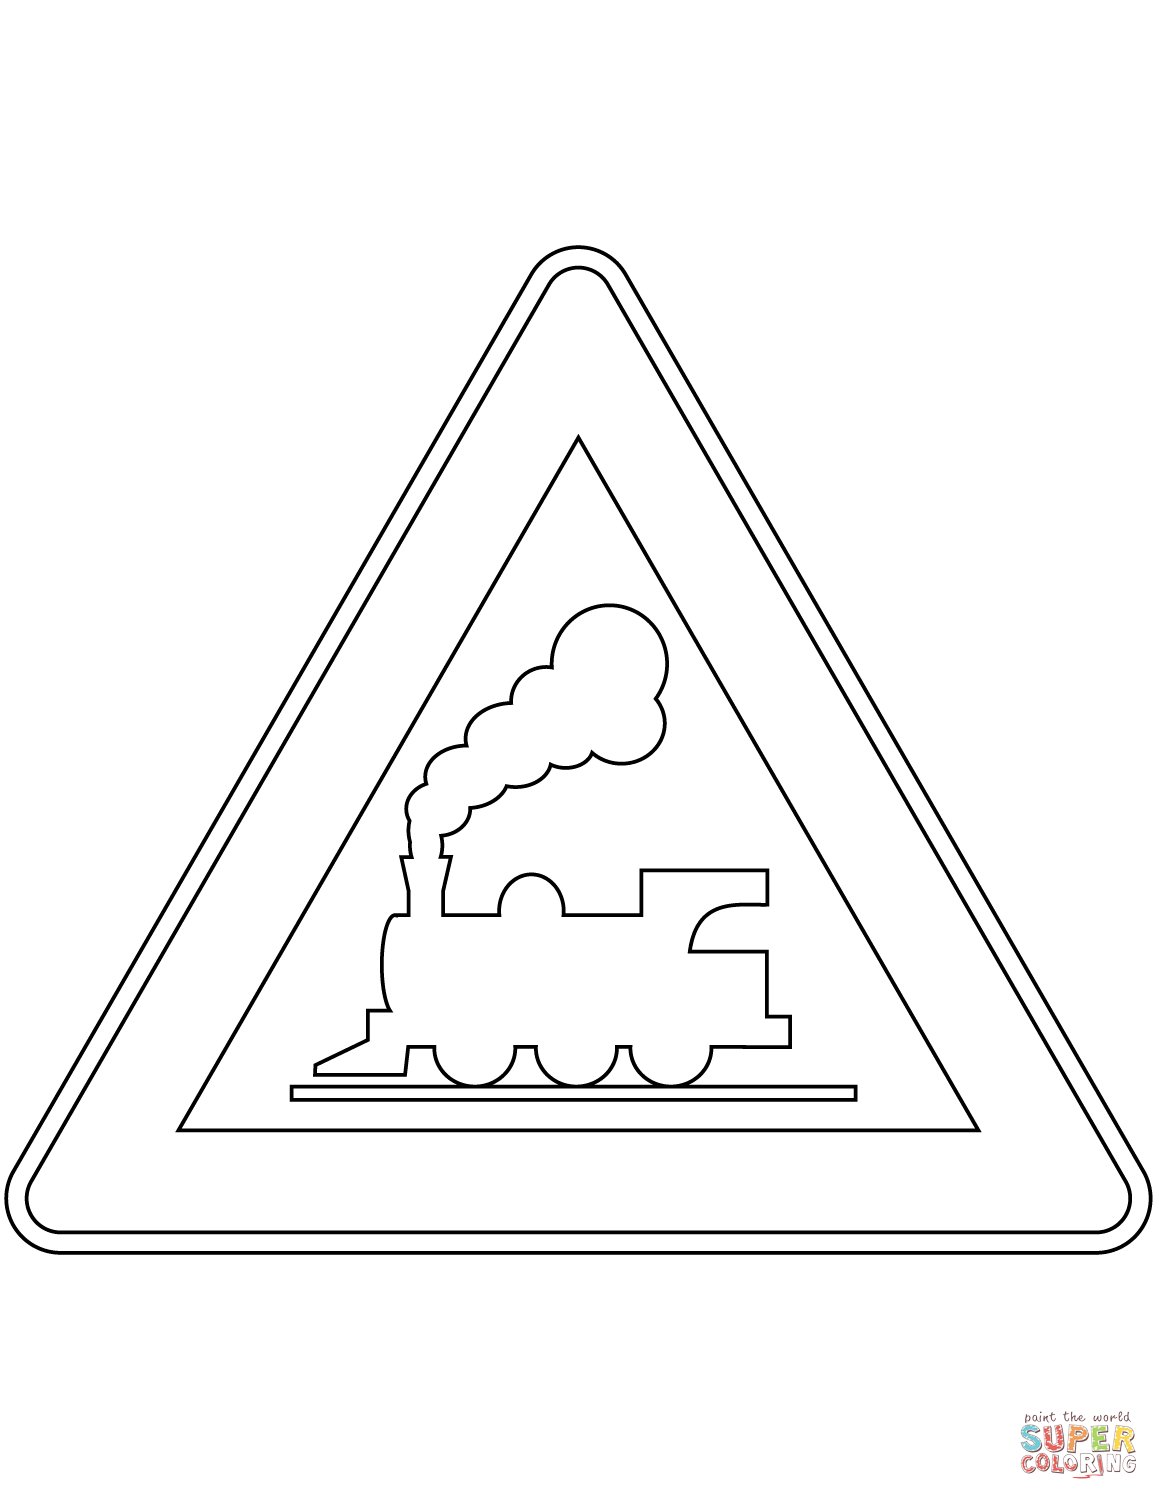 Railroad crossing sign in argentina coloring page free printable coloring pages